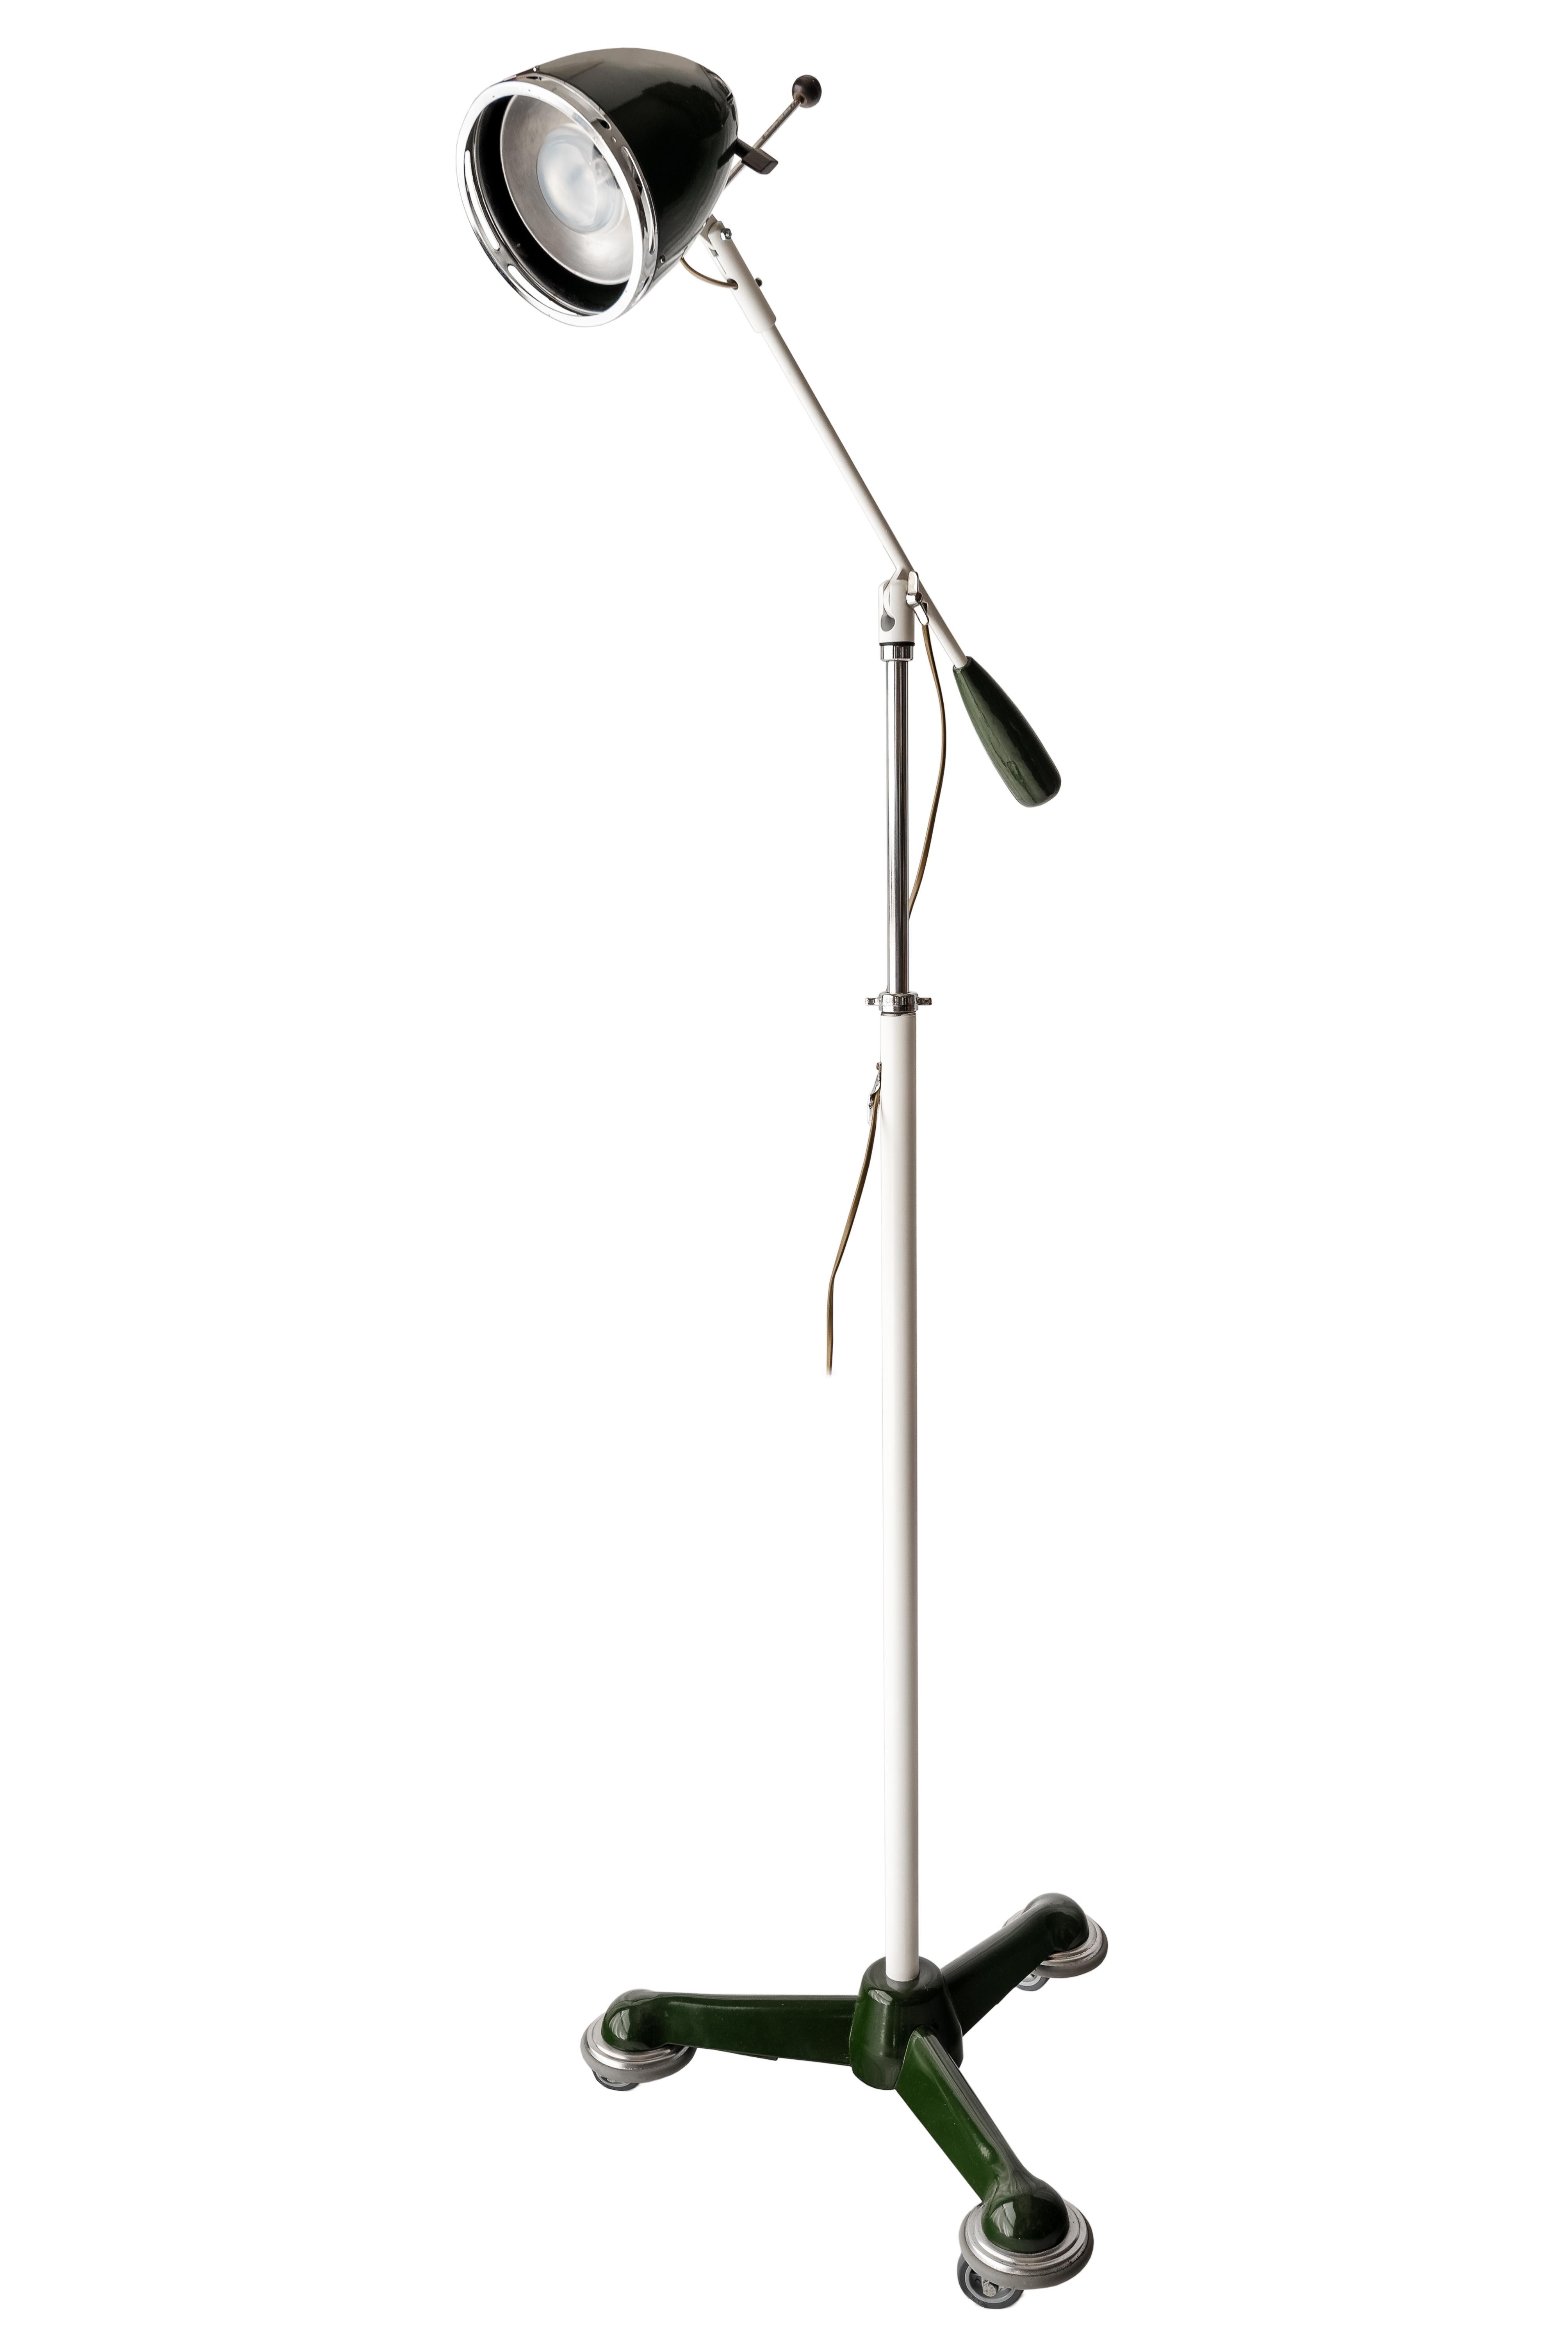 Cold-Painted Midcentury Metal Bauhaus Floor Lamp by Christian Dell for Bünte & Remml, 1930